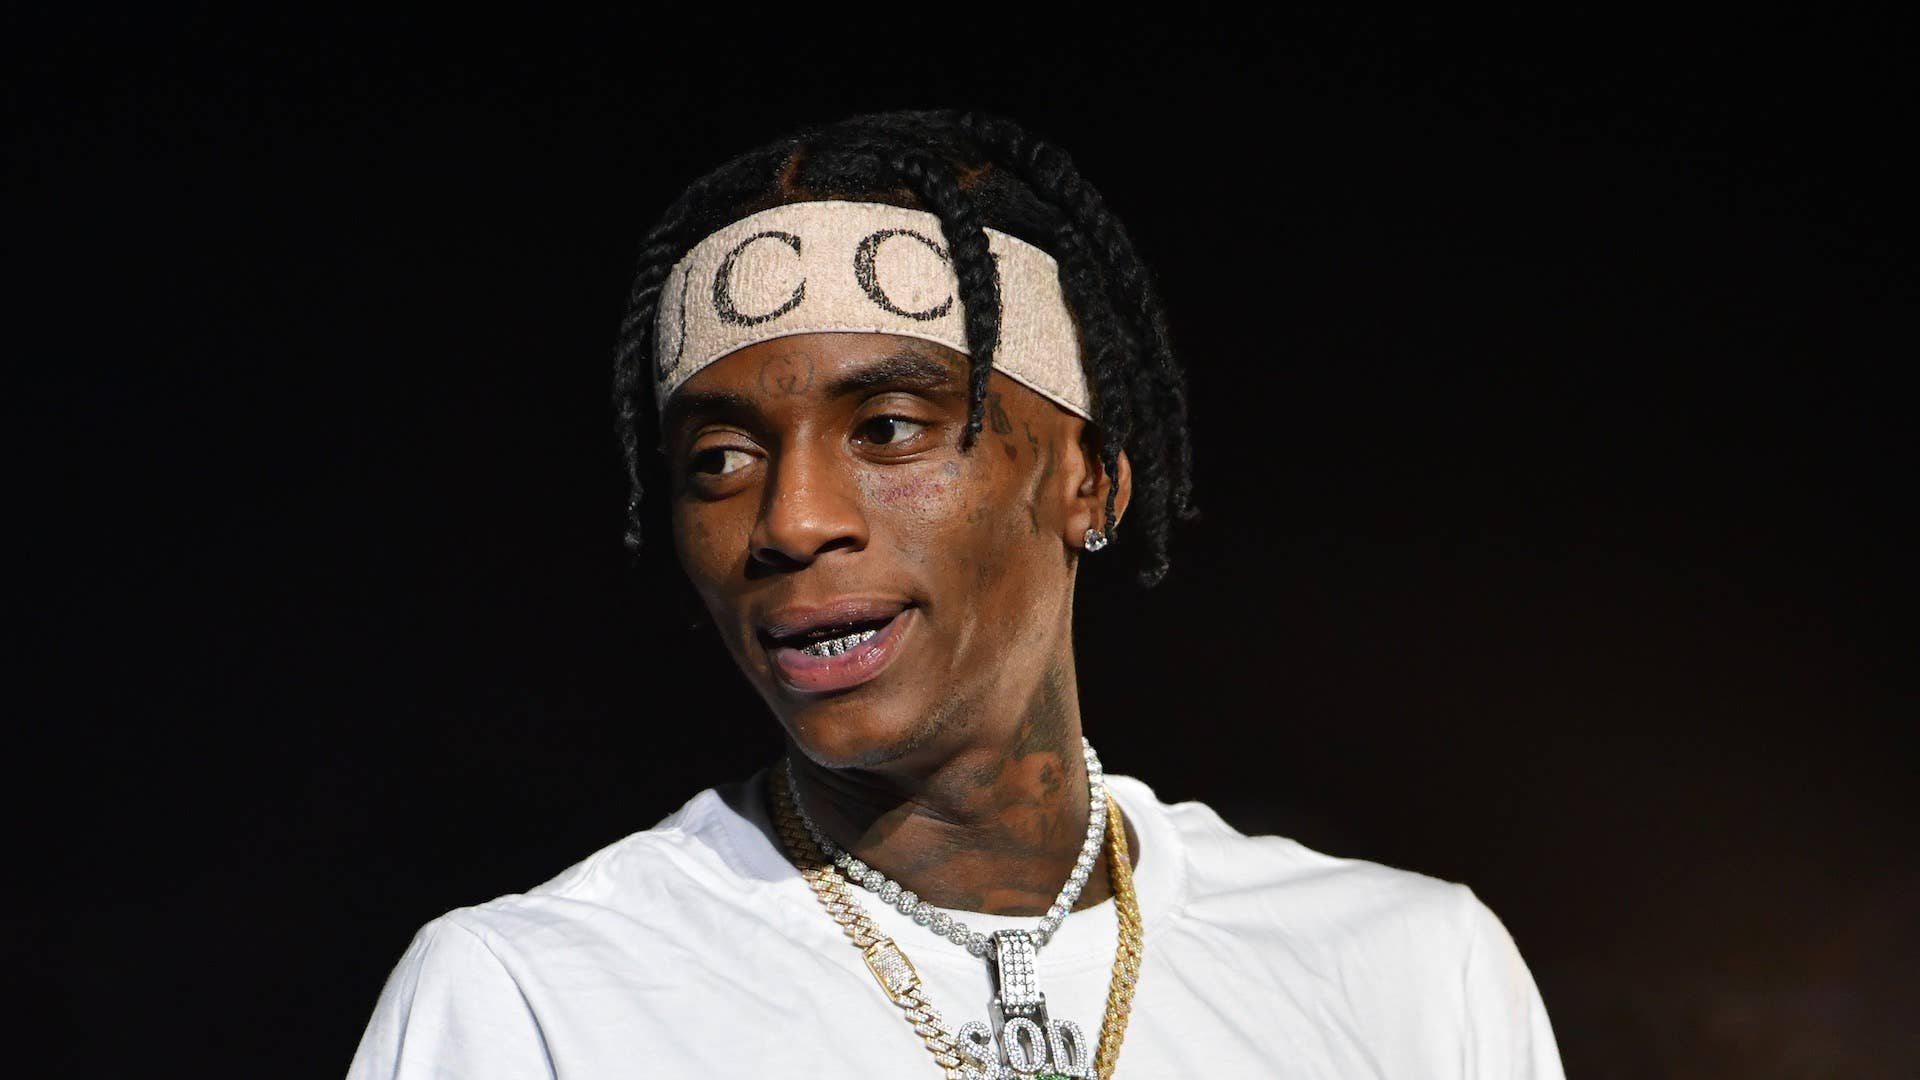 Soulja Boy’s Baby Mama Distressed And Prescribed Anxiety Meds After Suing Blueface